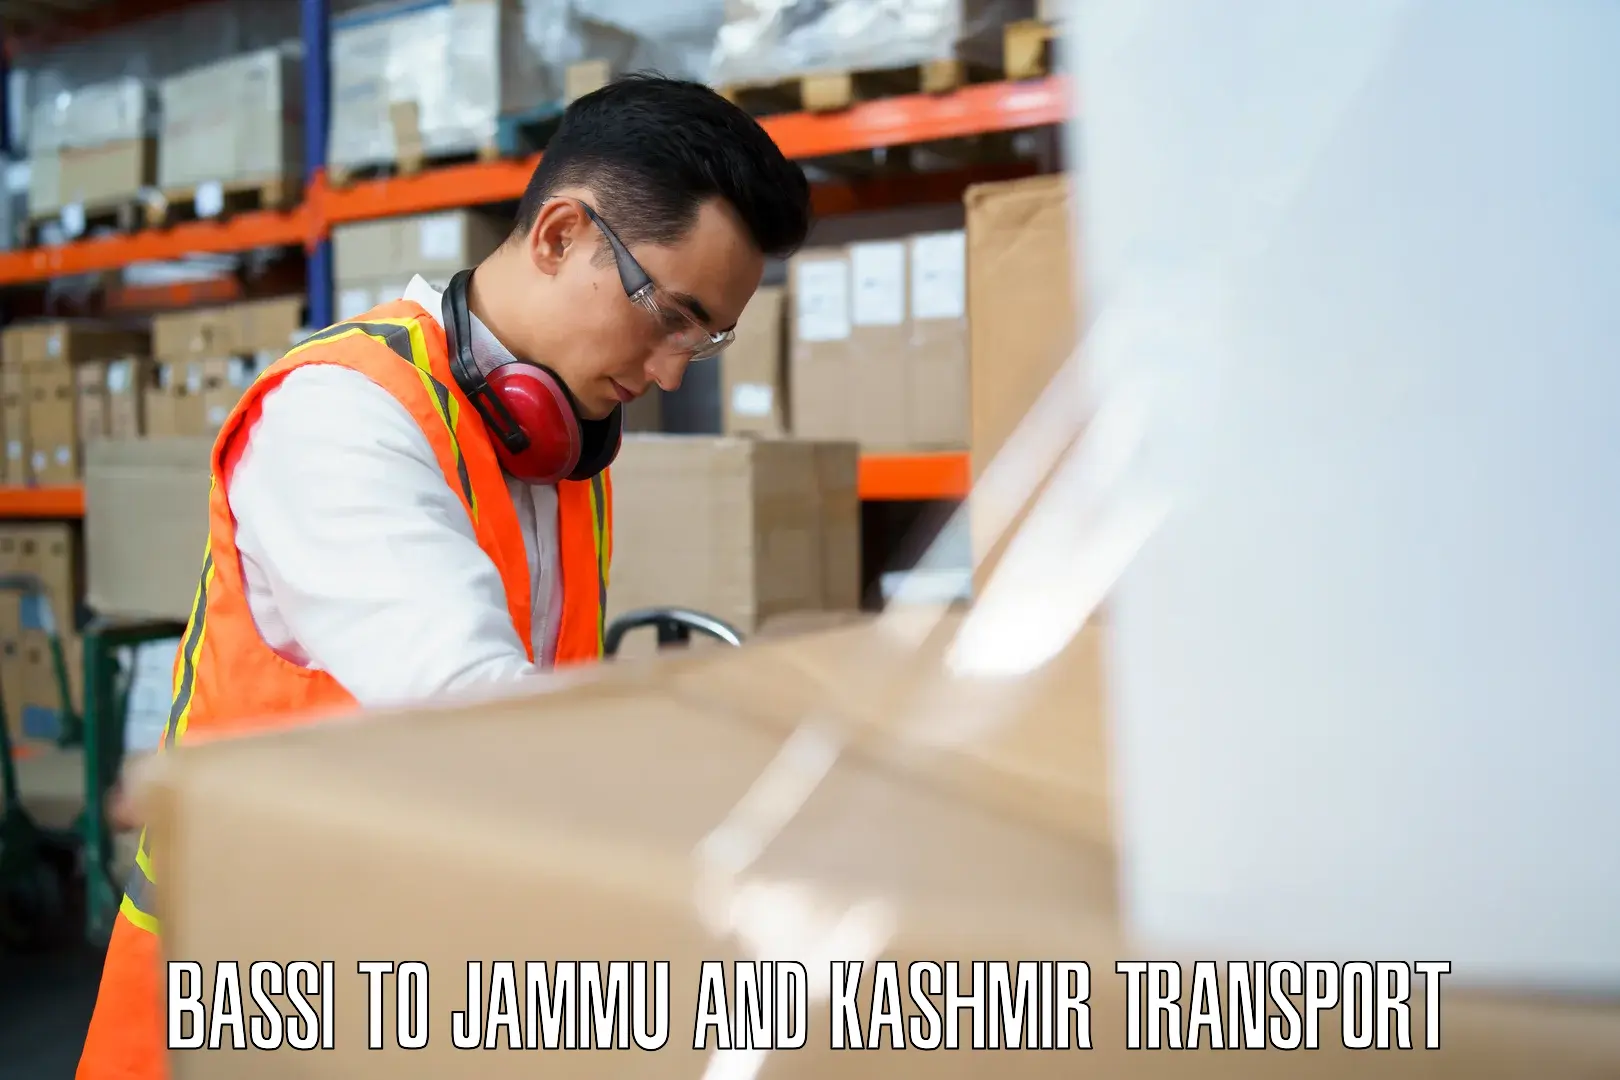 Delivery service Bassi to Jammu